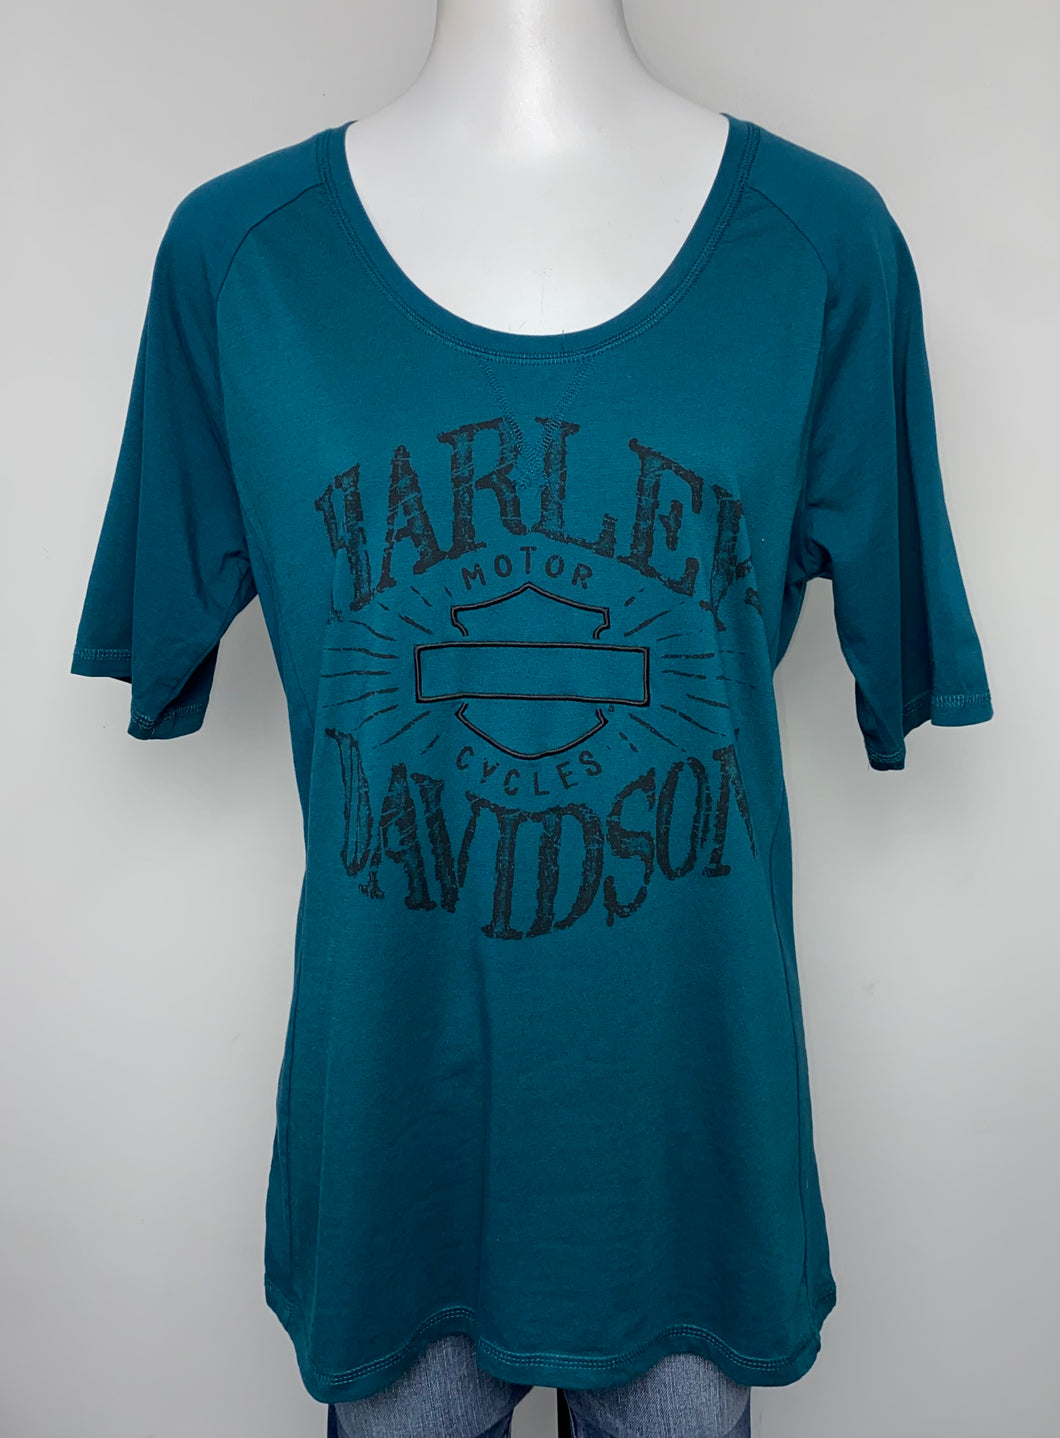 Harley D Graphic Tee- (XL)